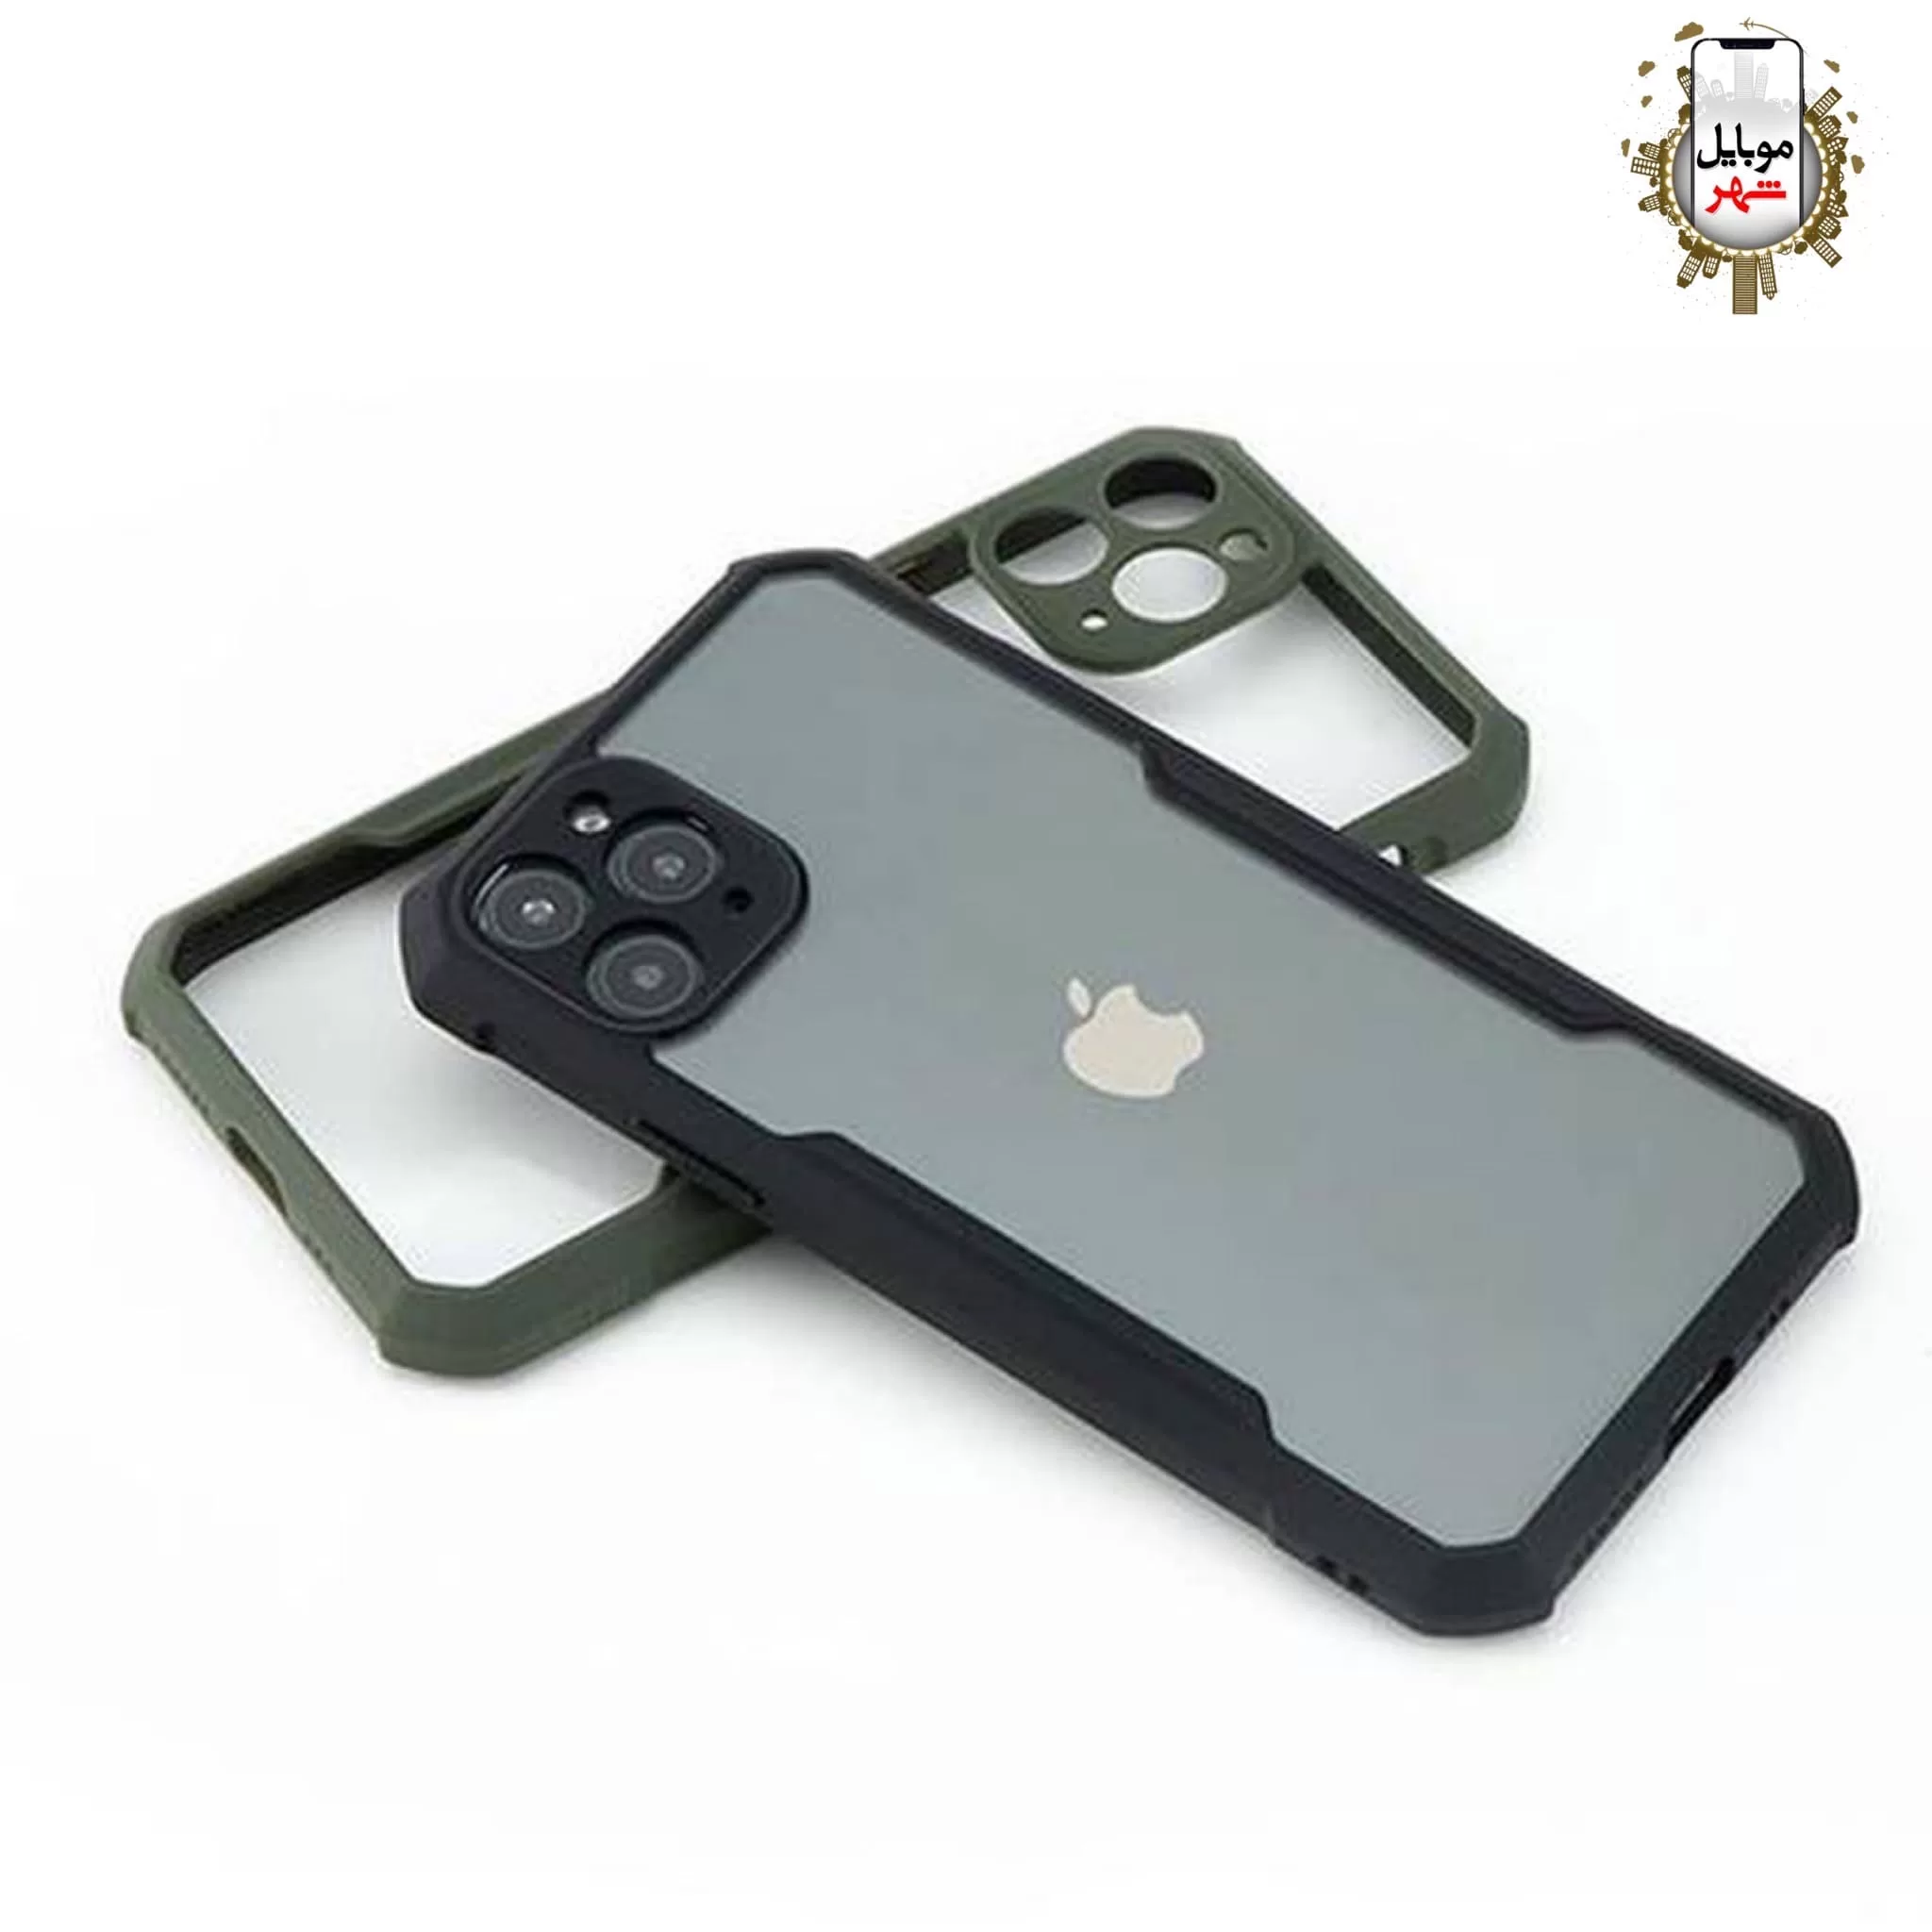 Green Stylishly Tough Case For Iphone 12 5.4